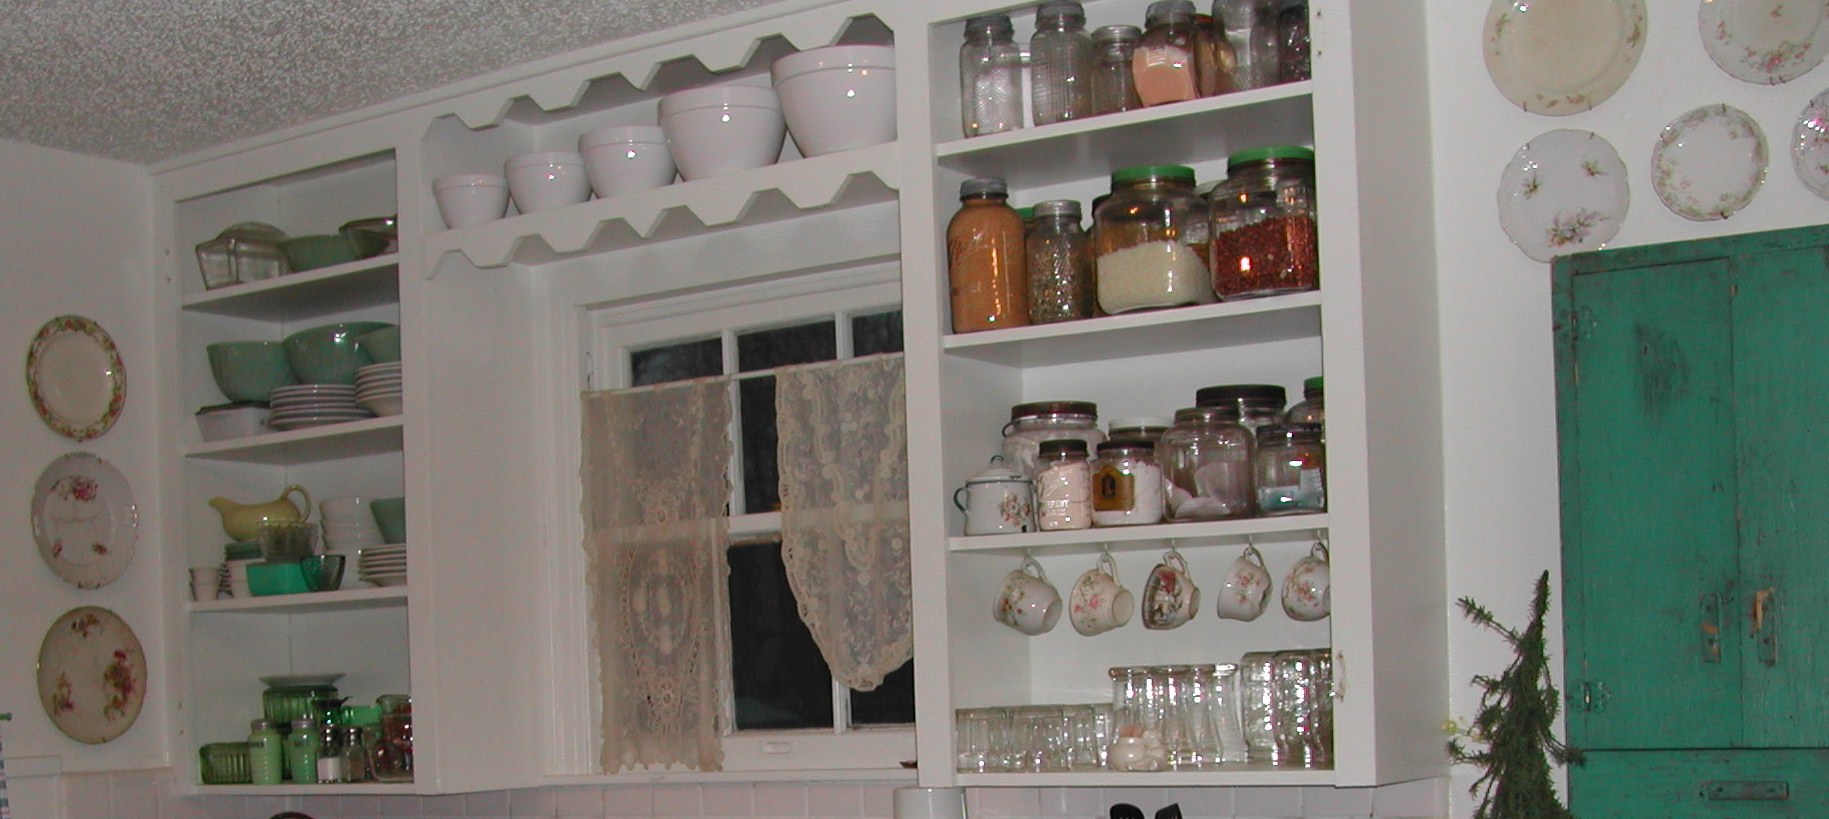 decorative jars, teacups, and plates in old kitchen